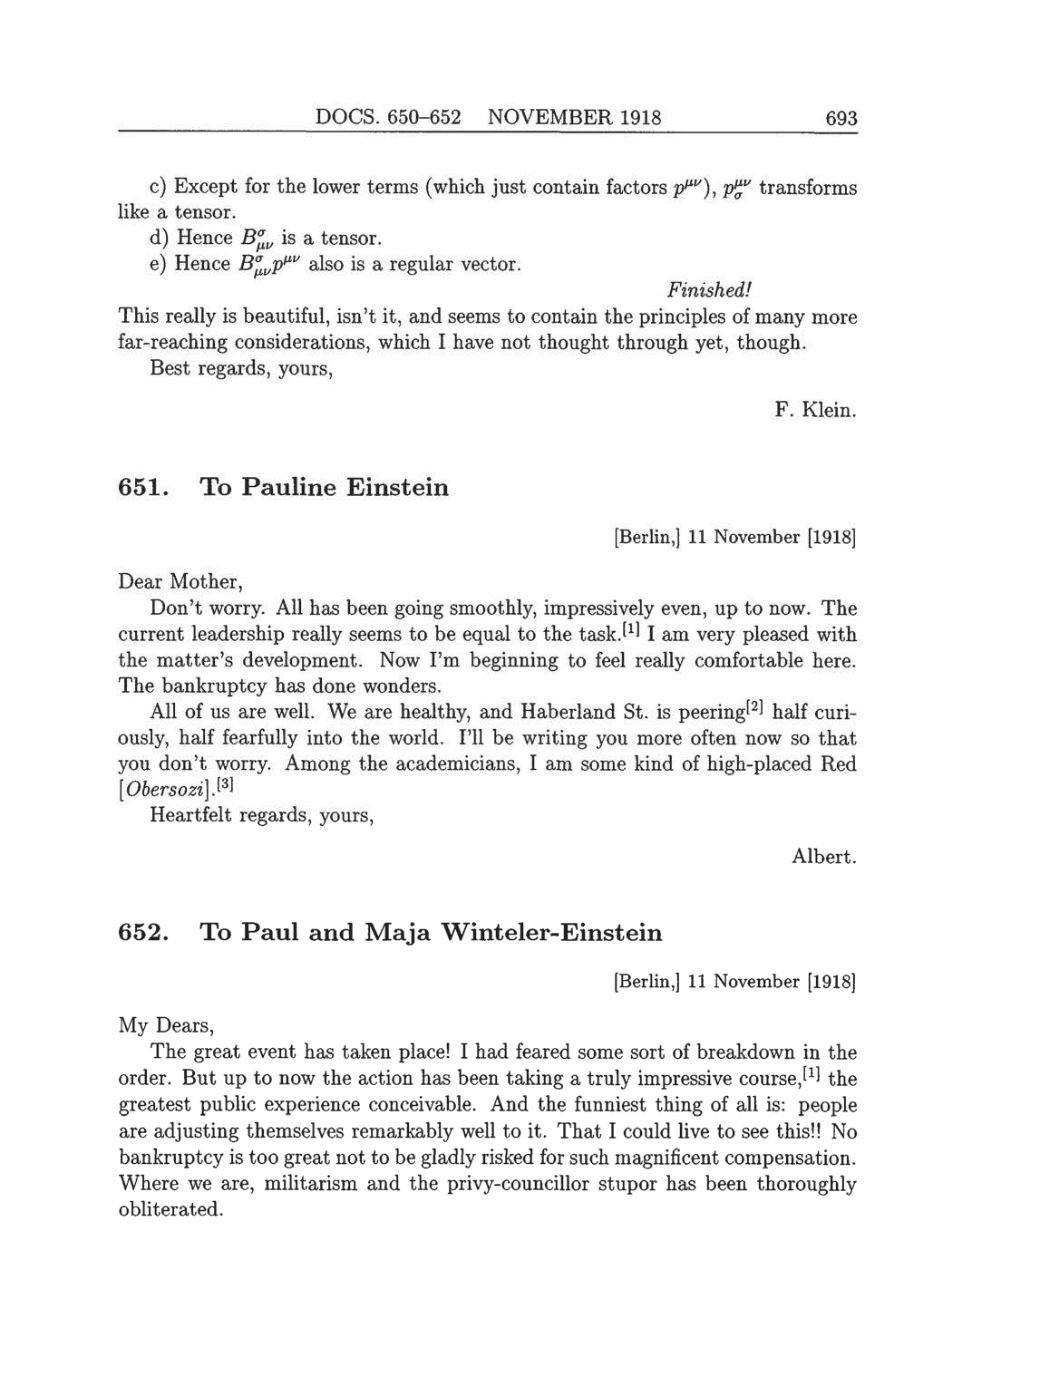 Volume 8: The Berlin Years: Correspondence, 1914-1918 (English translation supplement) page 693